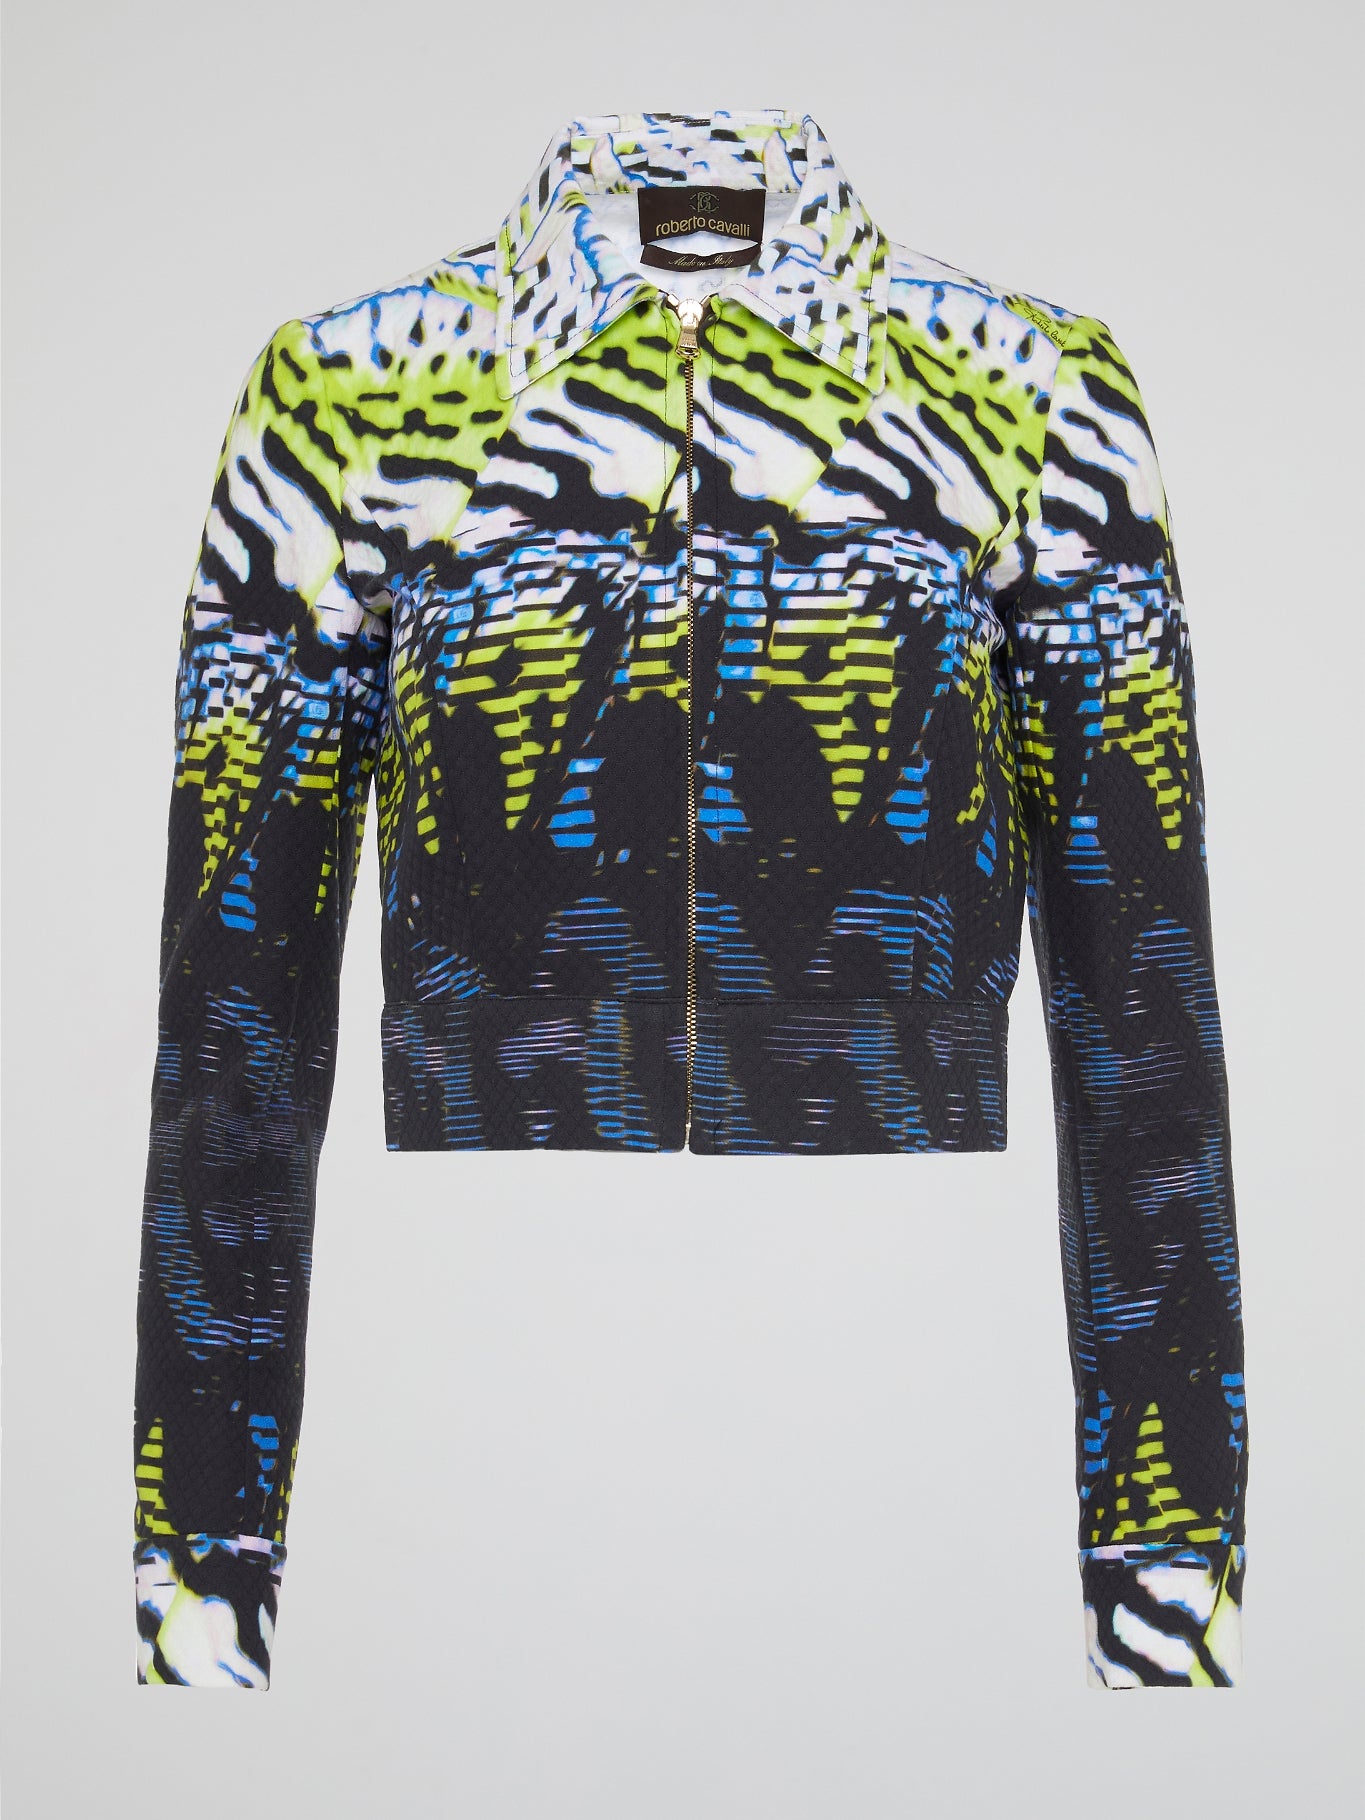 This Printed Zip Up Cropped Jacket by Roberto Cavalli is a bold and eye-catching piece that will make you stand out from the crowd. The intricate print and cropped silhouette add a touch of edgy flair to any outfit, while the high-quality construction ensures durability and longevity. Perfect for adding a statement piece to your wardrobe, this jacket is sure to turn heads and make a lasting impression wherever you go.